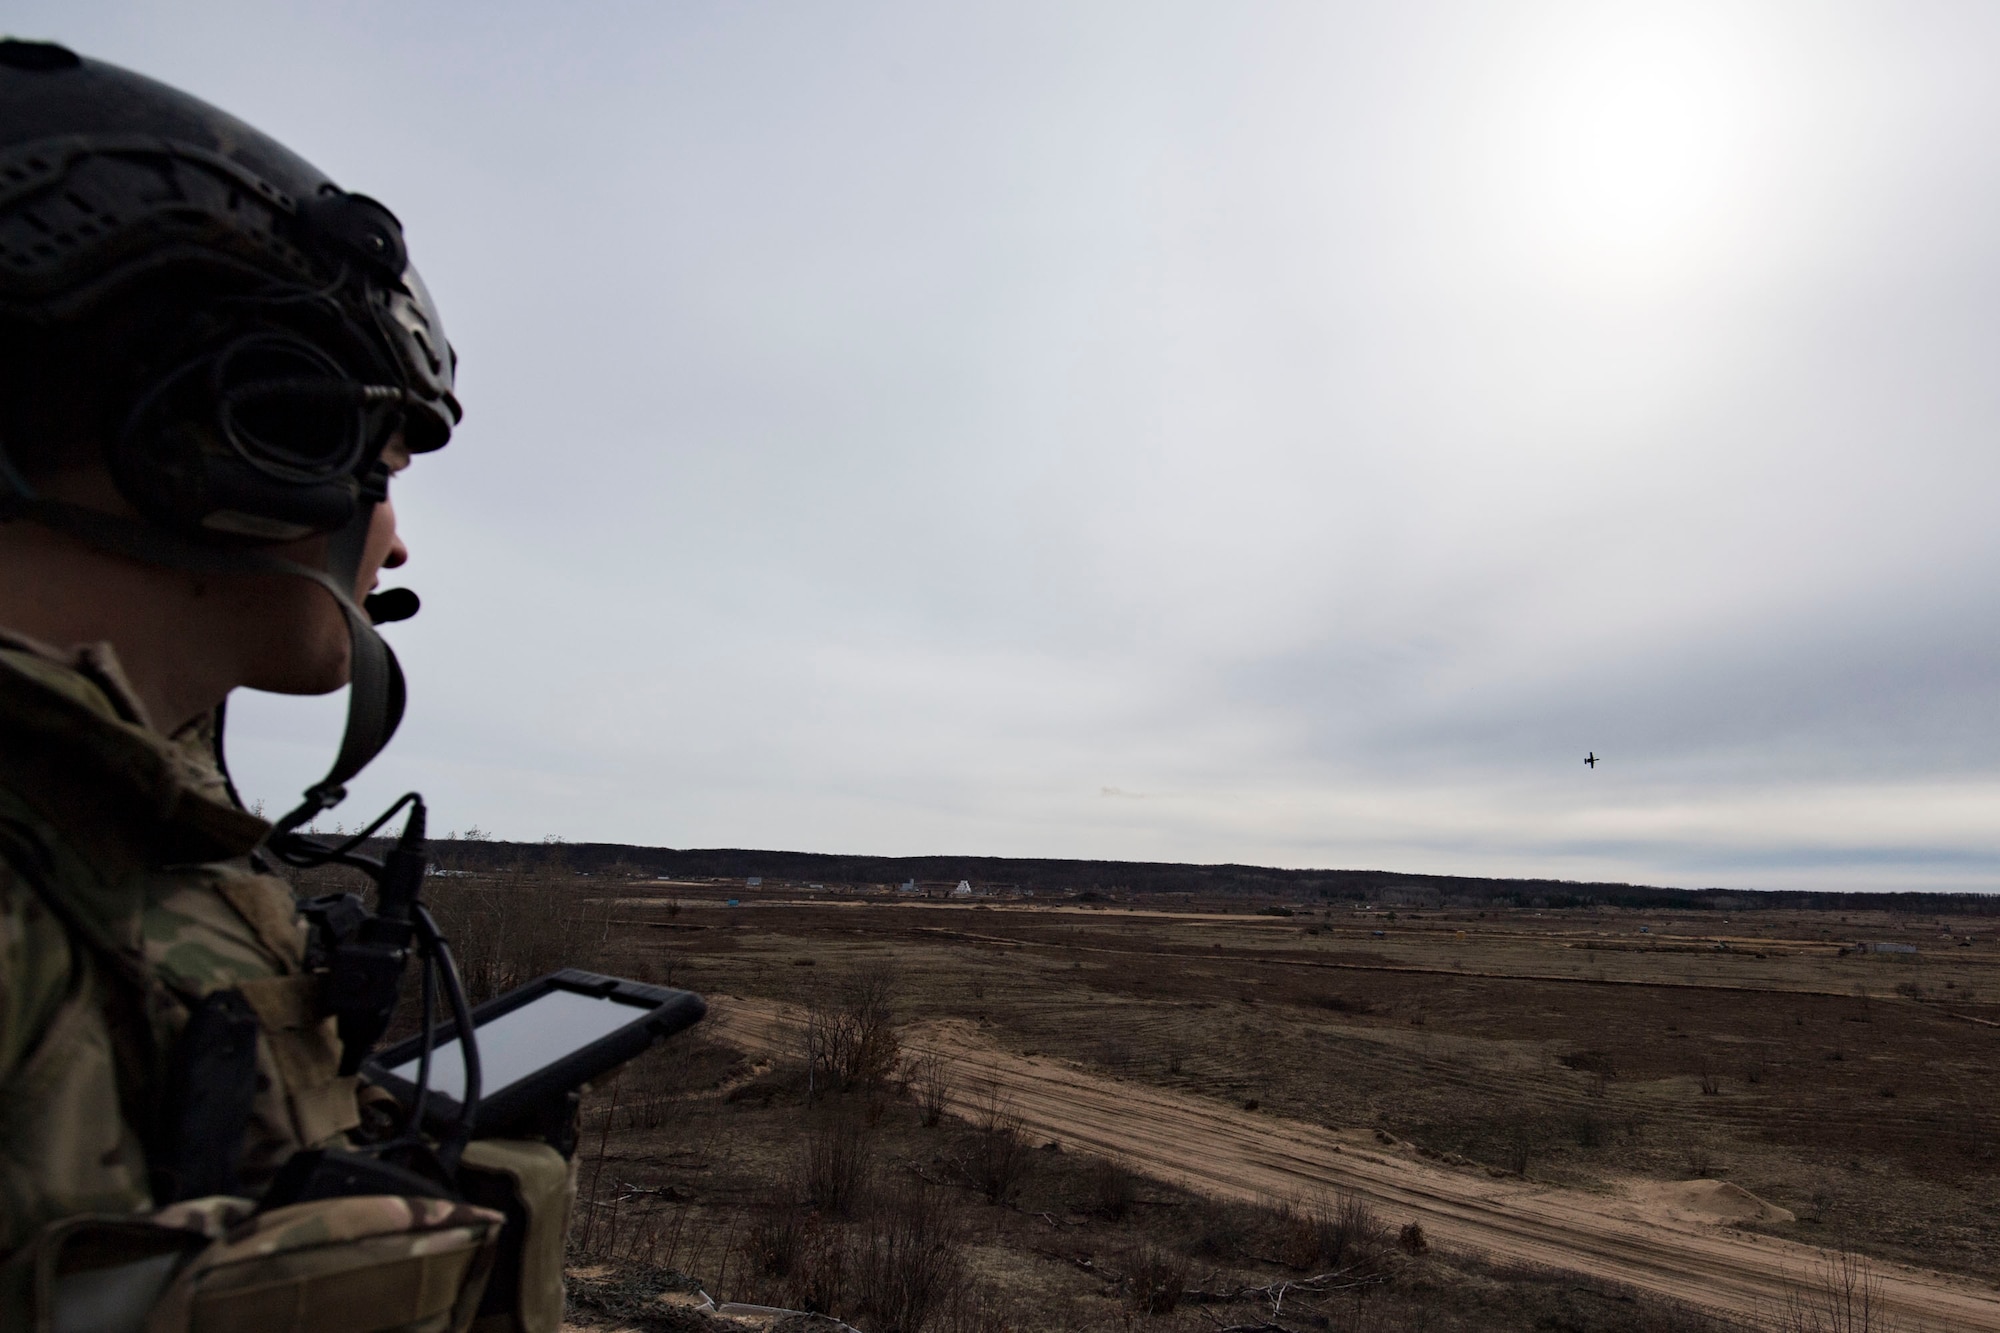 U.S. Air Force Senior Airman Tyler Marketon, 19th Air Support Operations Squadron Tactical Air Control Party specialist, watches as an A-10C Thunderbolt II attacks simulated targets during a close air support exercise, April 13, 2017, at Camp Grayling, Mich. To further build interoperability and hone their unique skillset, members of the German air force Air Ground Operations Squadron travelled to the U.S. to partner with the 19th ASOS and conduct a close air support exercise working with A-10C Thunderbolts IIs and F-16 Fighting Falcons. (U.S. Air Force photo by Airman 1st Class Daniel Snider)